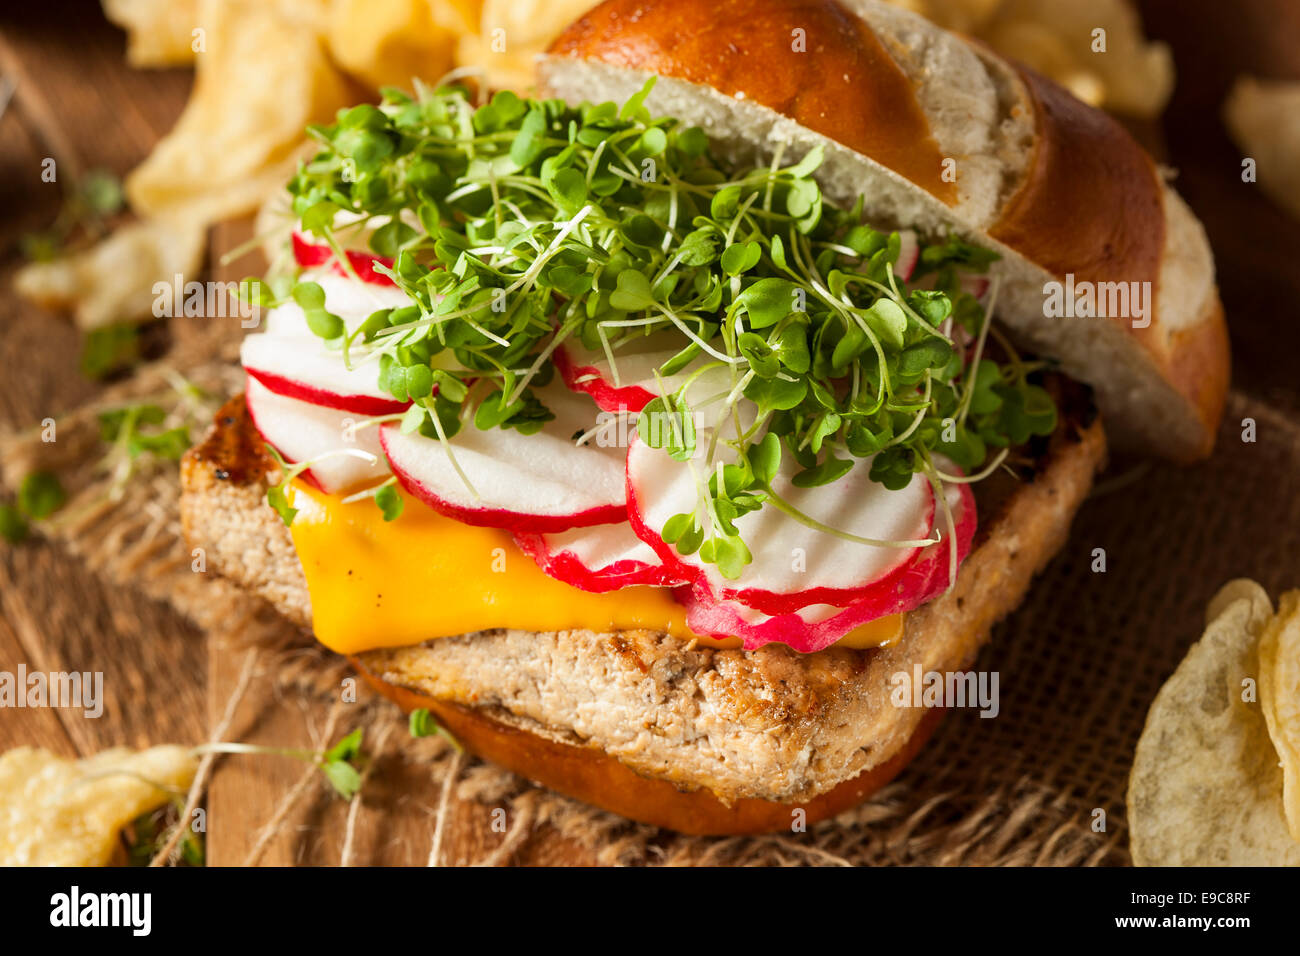 Homemade Vegetarian Soy Tofu Burger with Chips Stock Photo